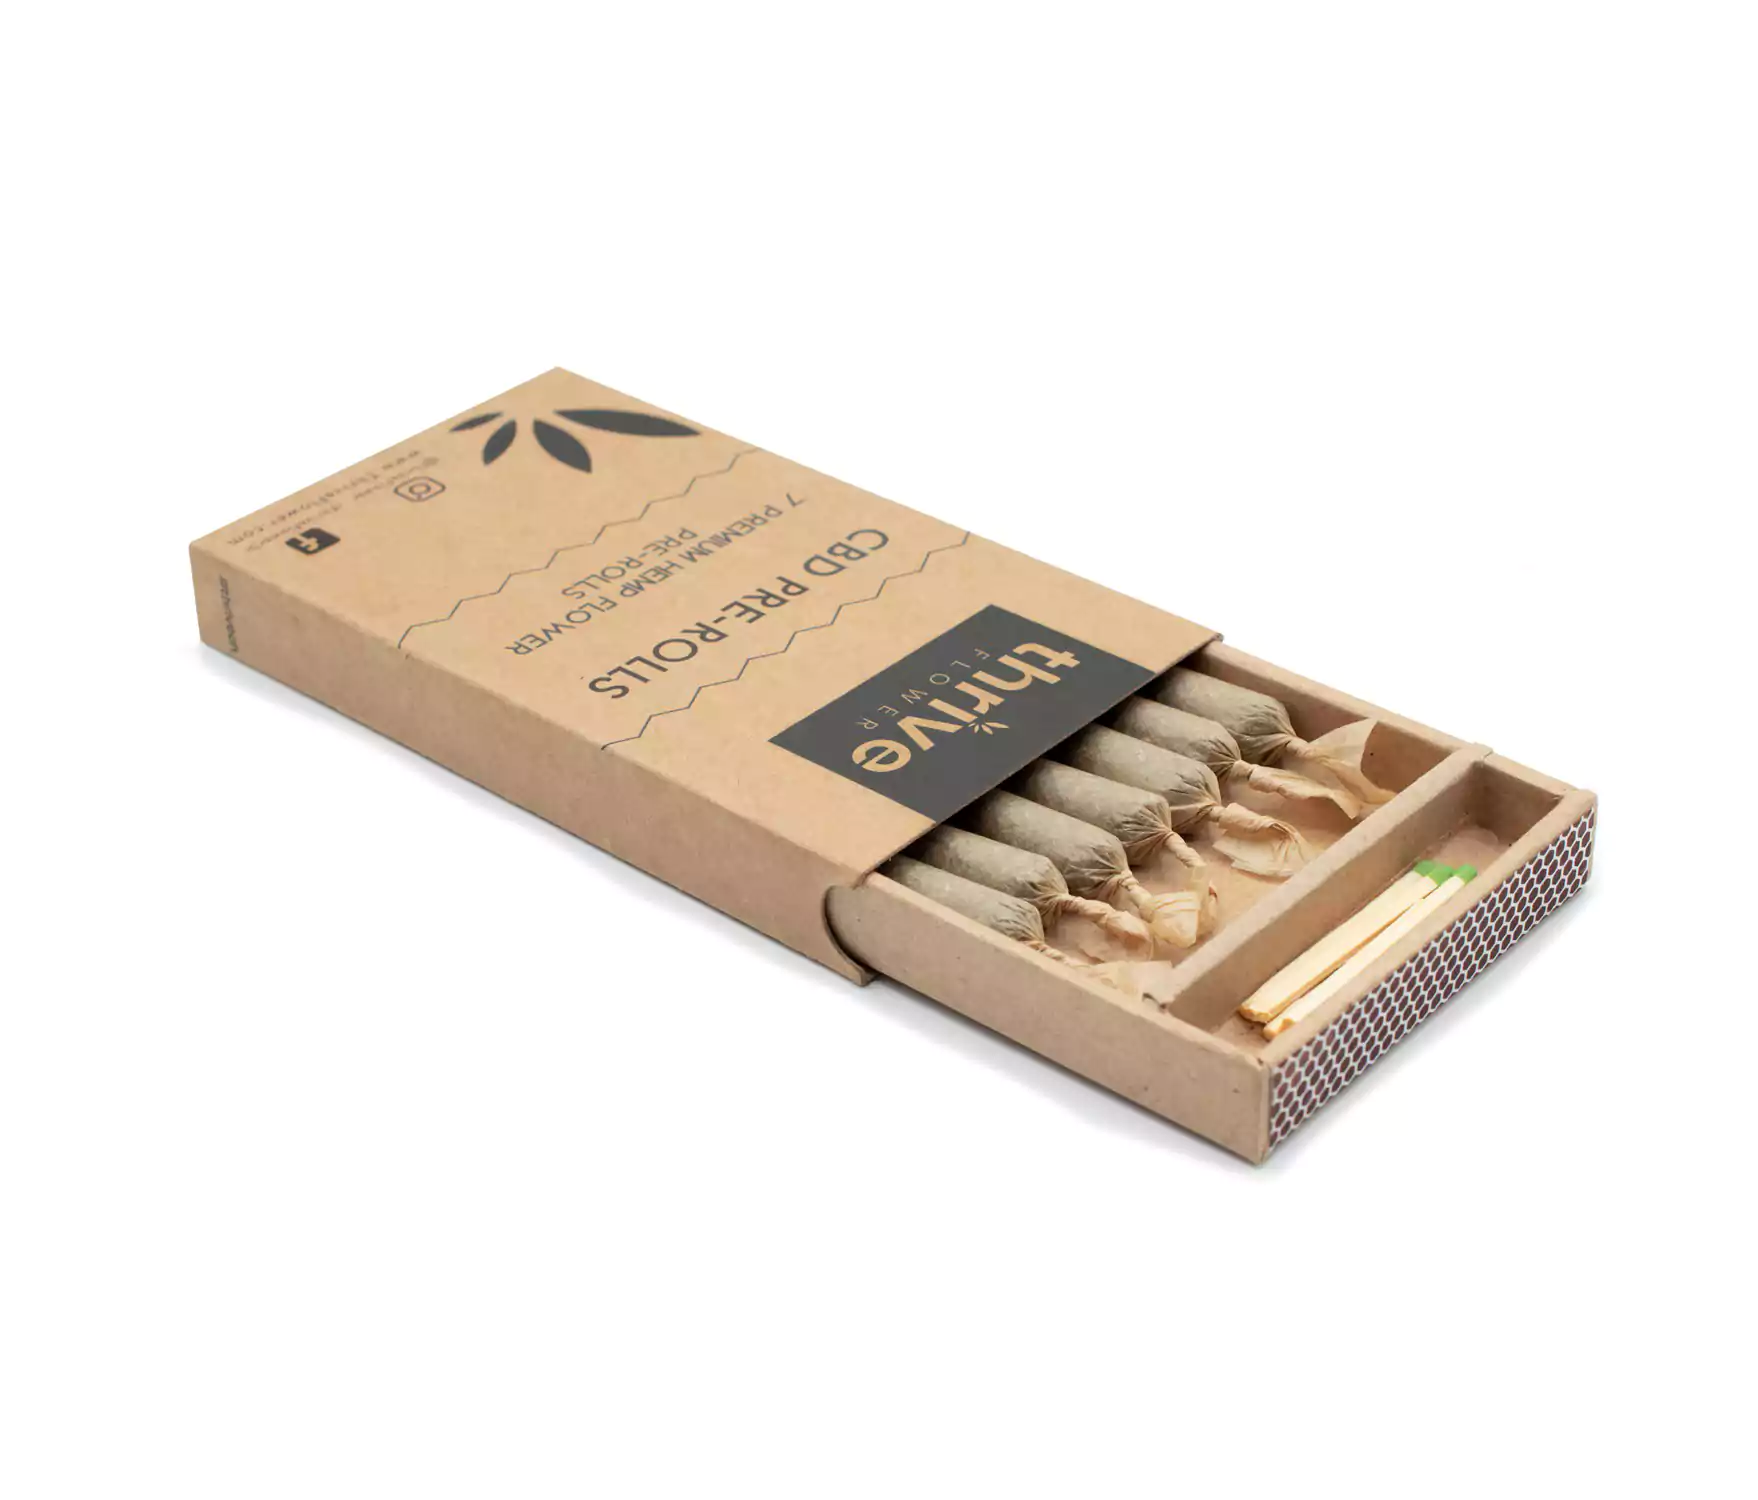 Franklin Pre-Roll Box Packaging with Matches